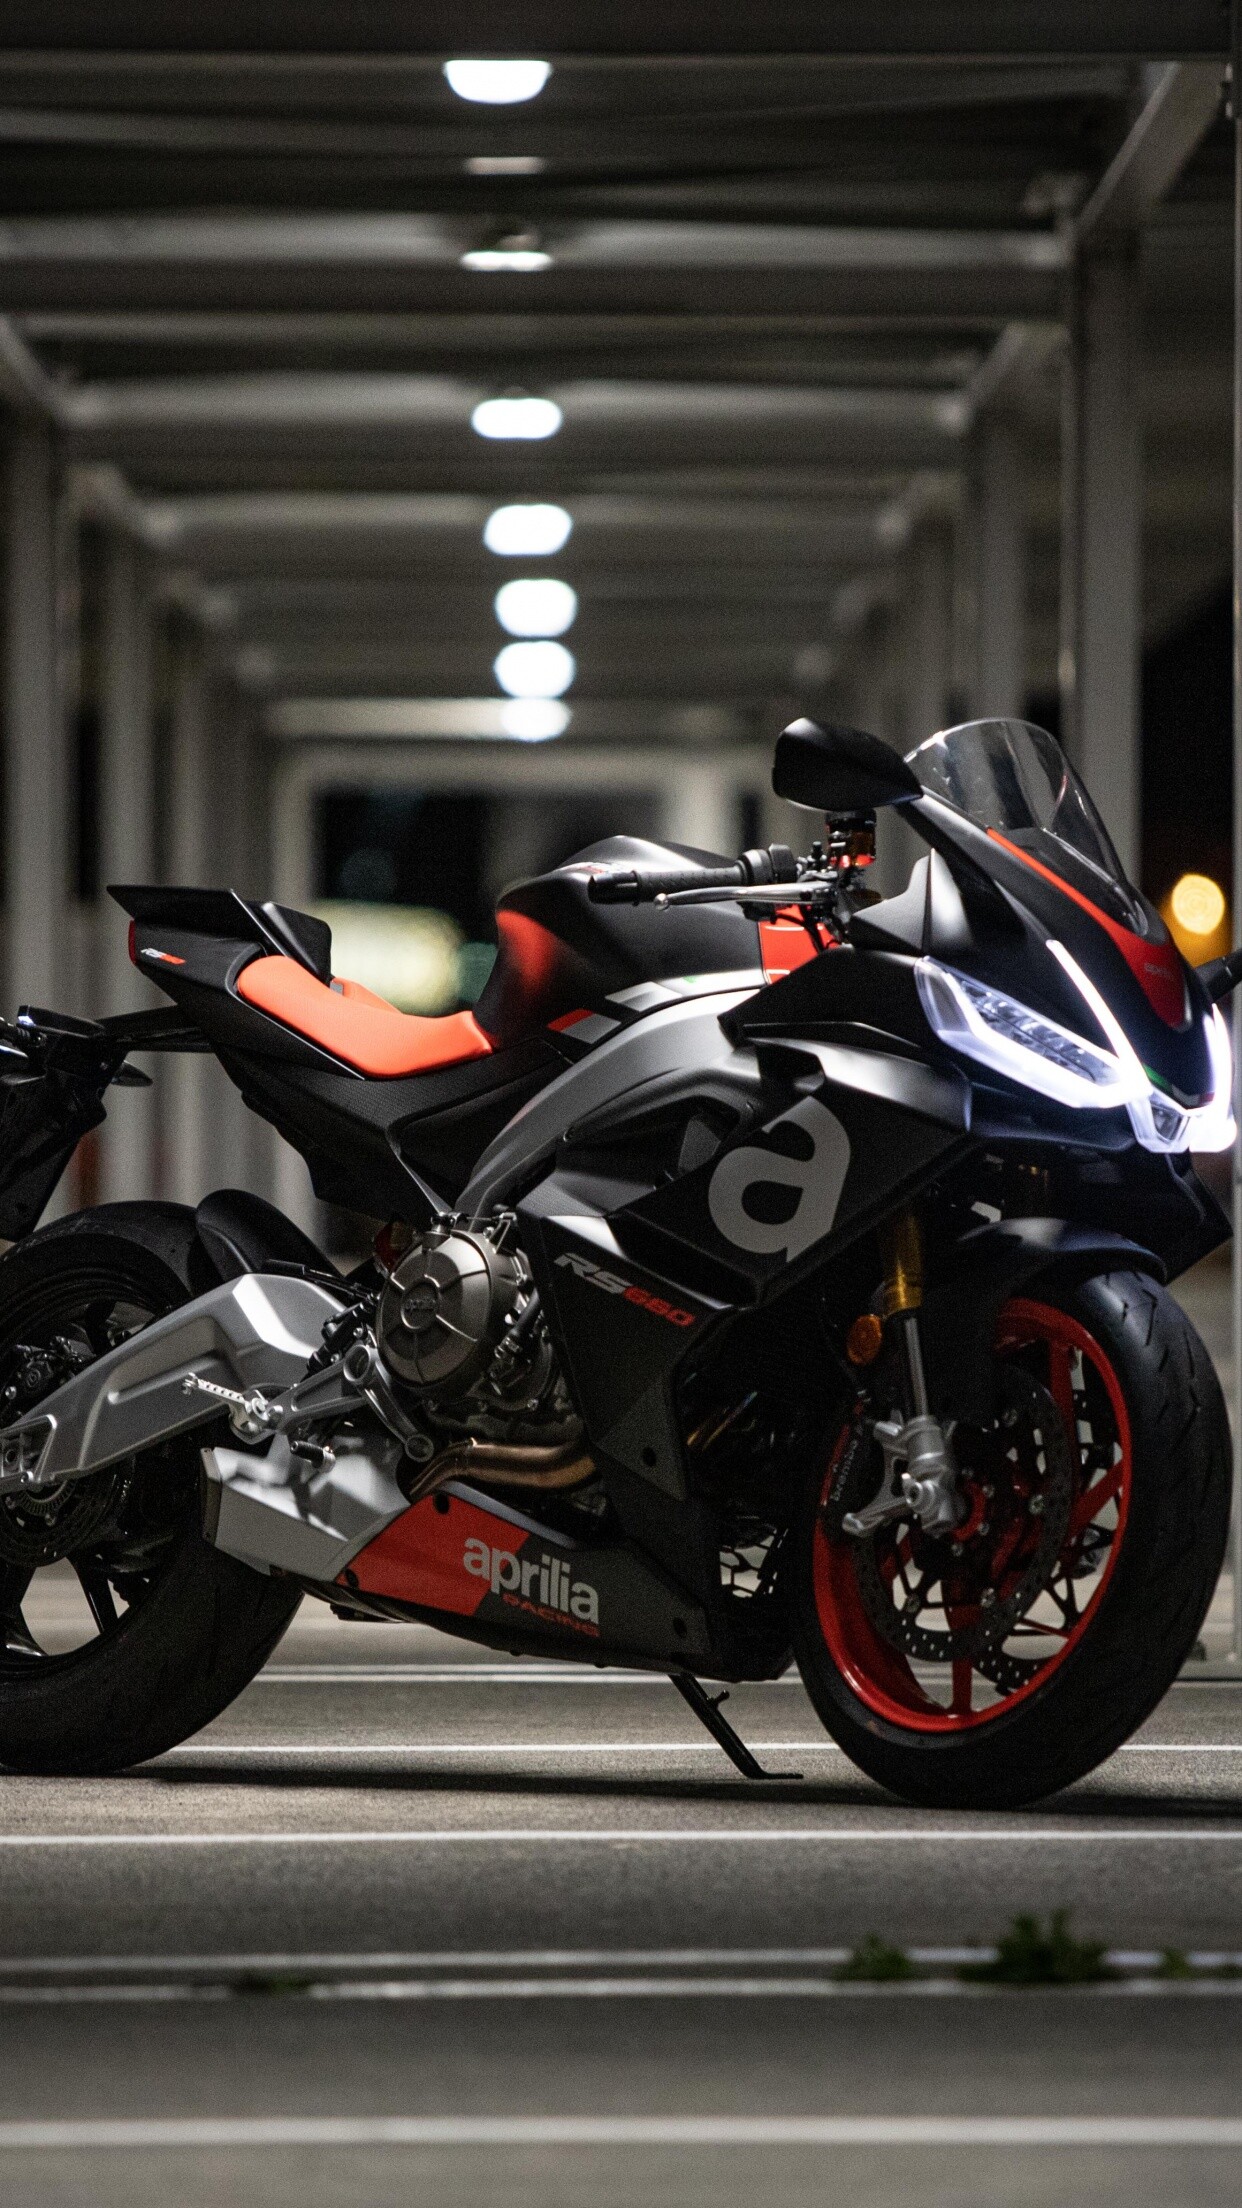 Aprilia: The brand has won a total of 54 world titles in motorcycle racing, RS 660, Sports bikes. 1250x2210 HD Background.